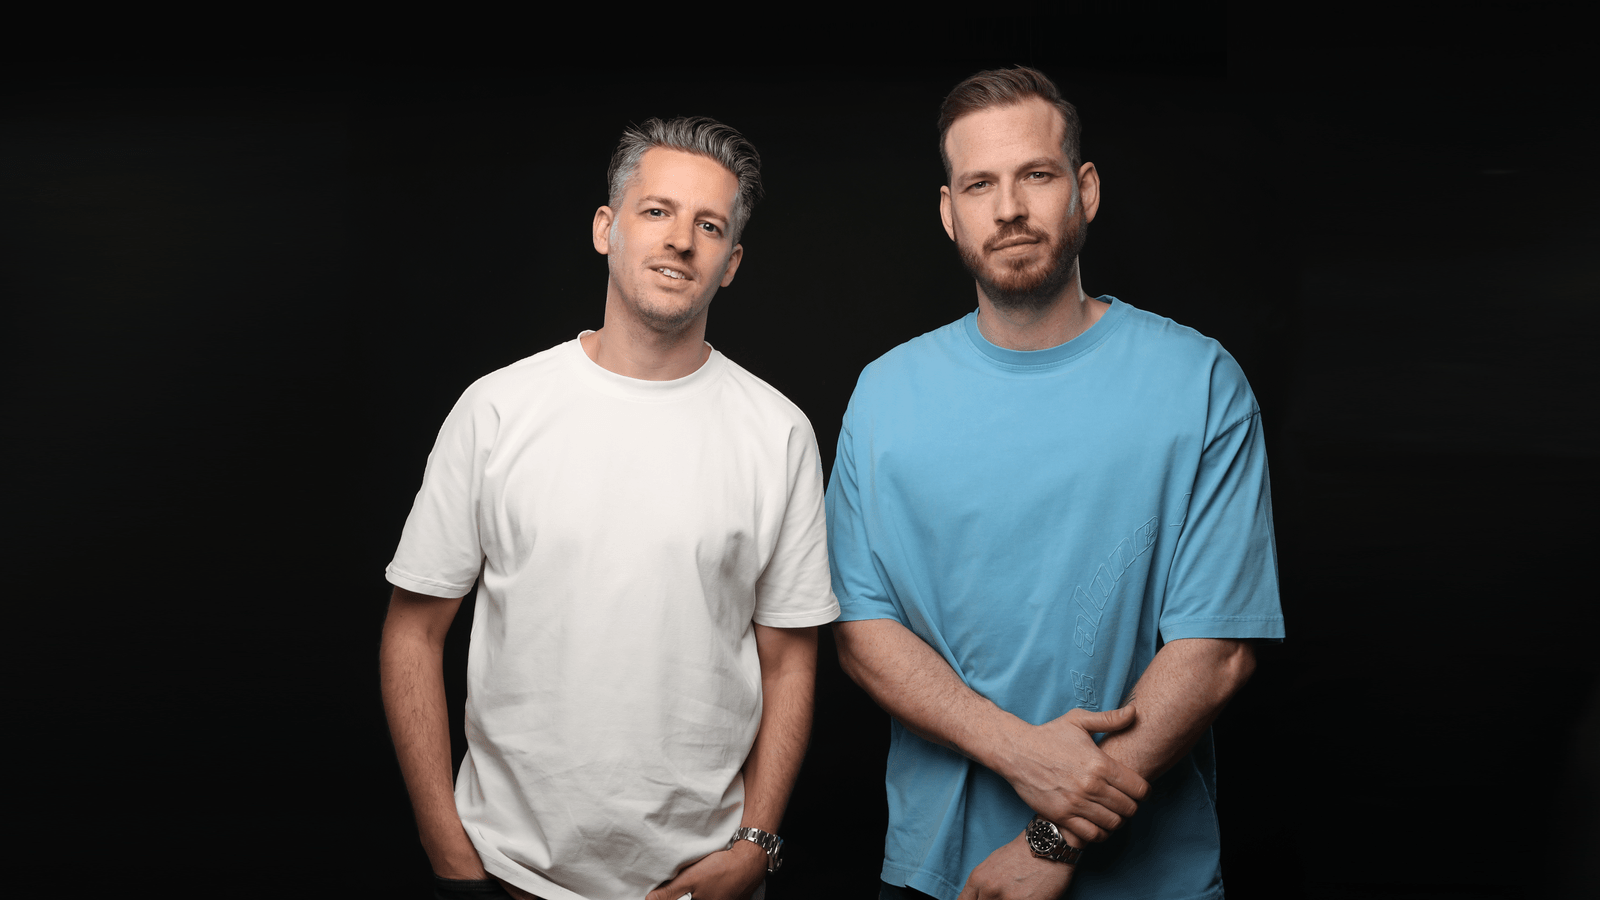 Firebeatz team up with DAMANTE on electric single What Happens Here via Spinnin’ Records